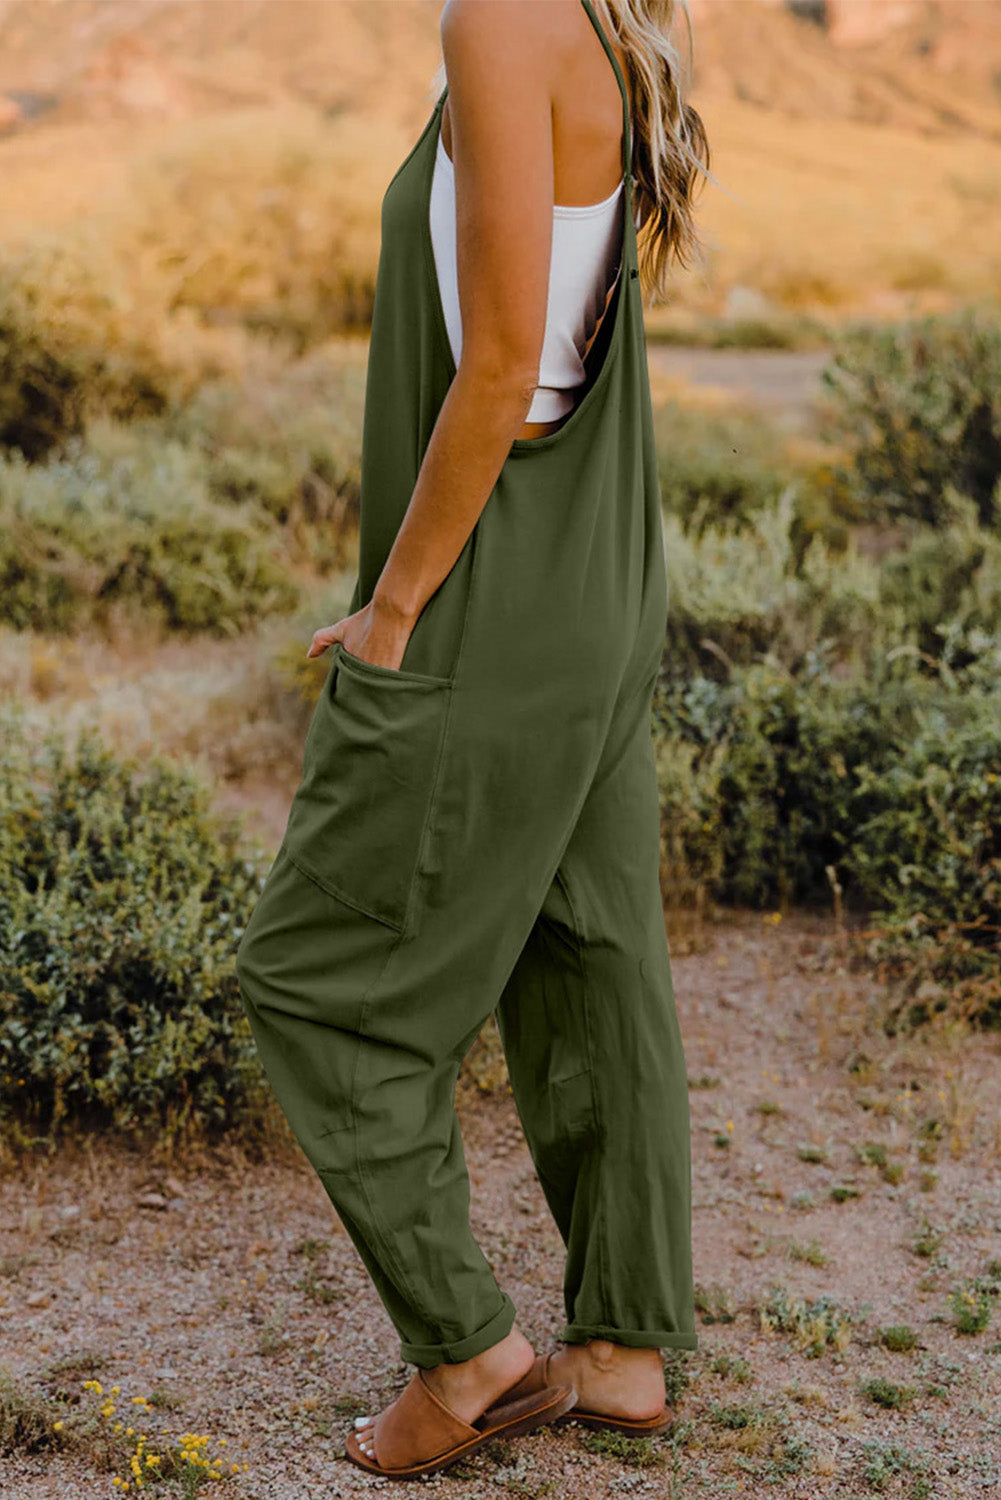 V-Neck Sleeveless Jumpsuit with Pocket - Cowtown Bling N Things